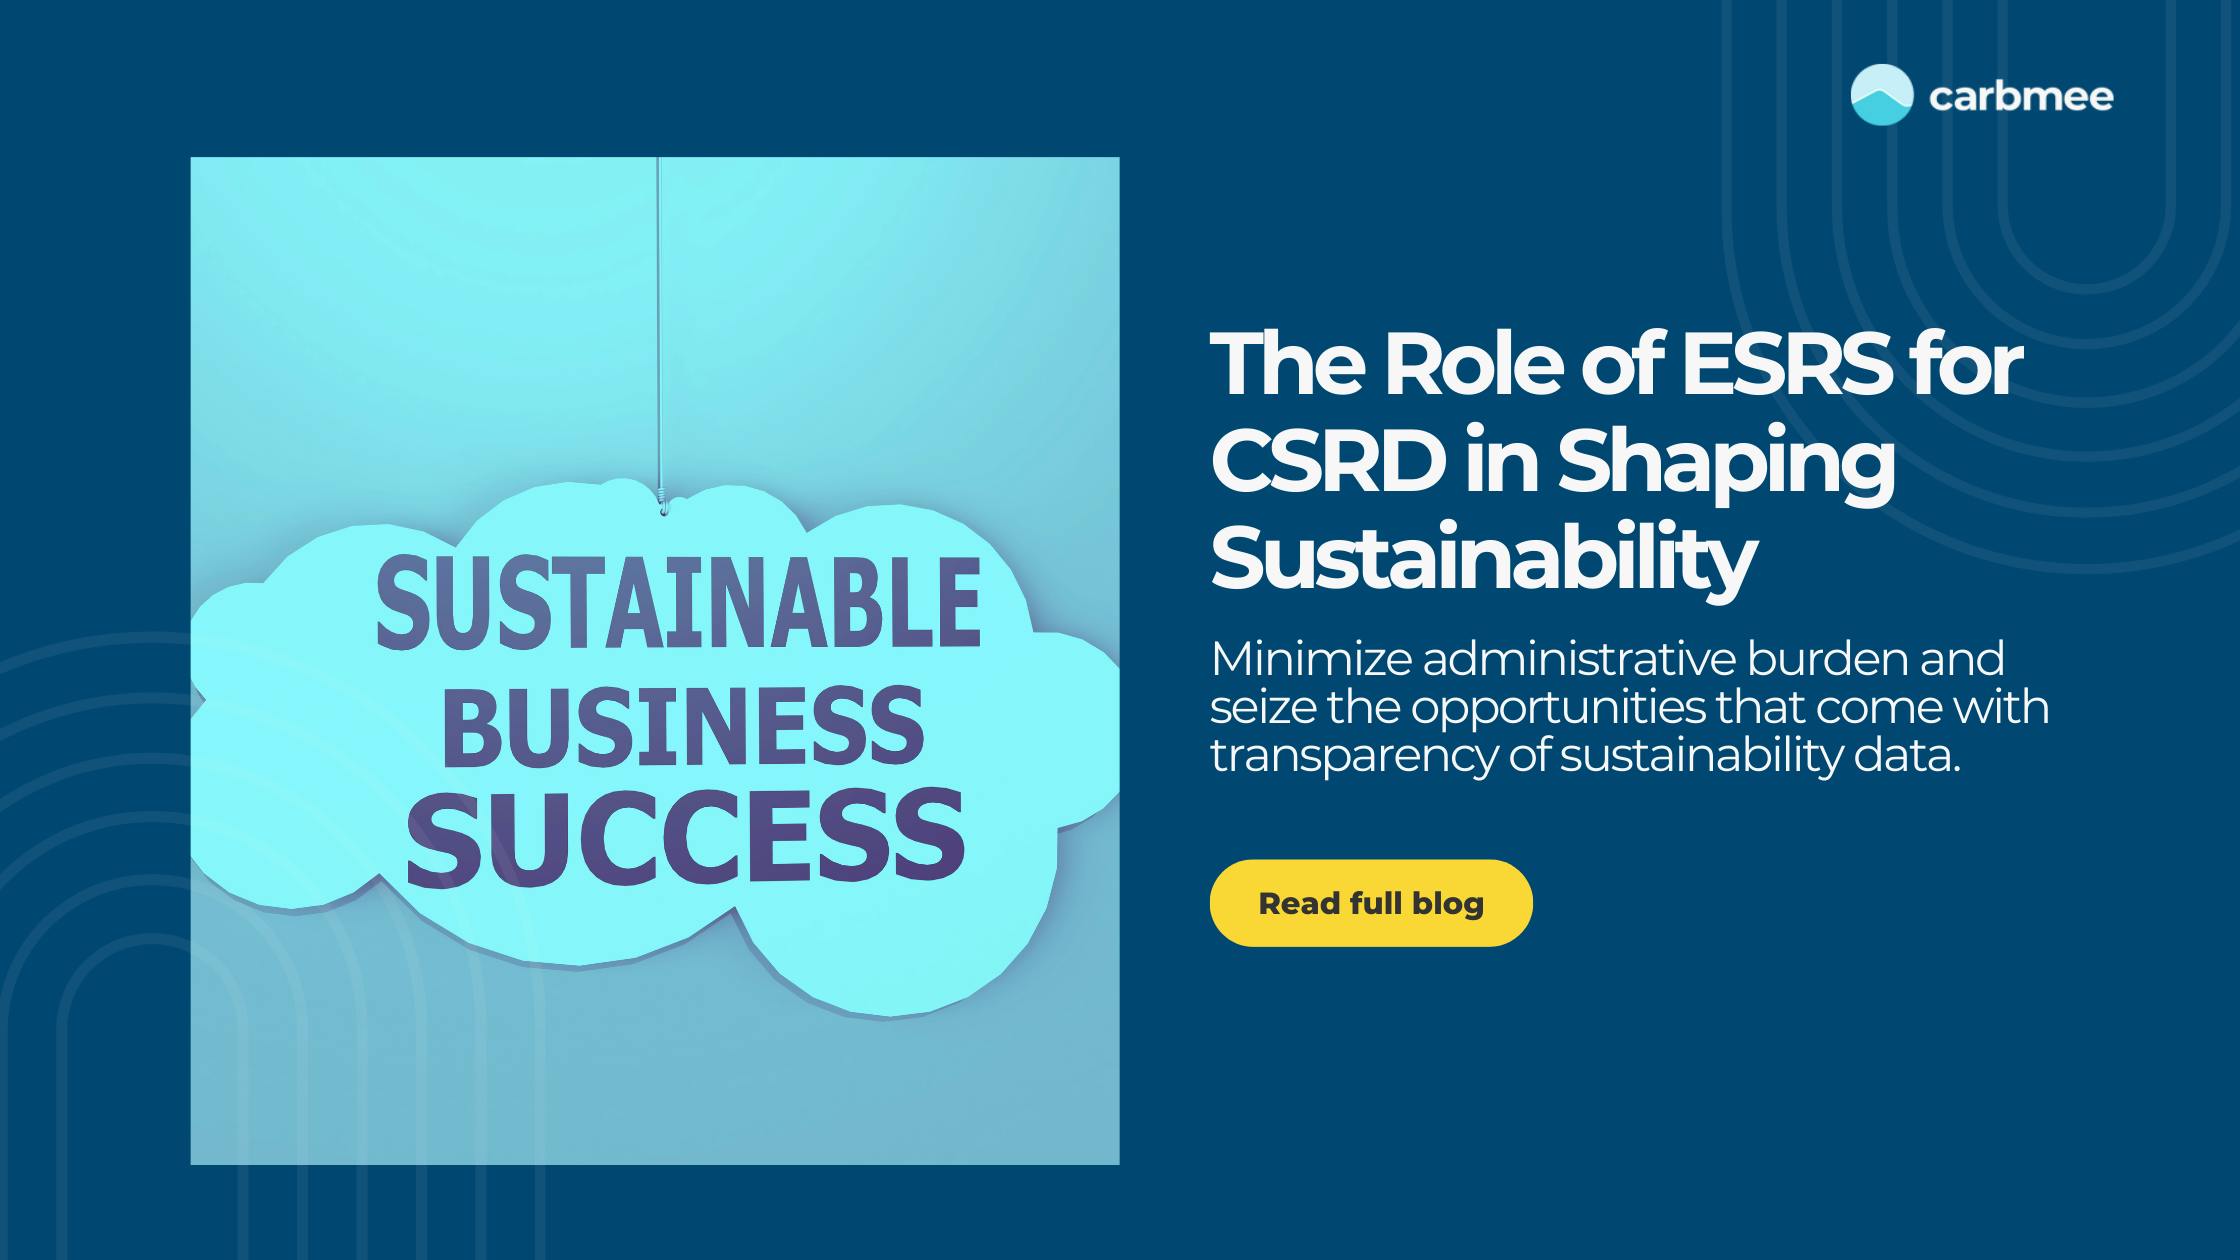 Measured Impact: The Role of ESRS for CSRD in Shaping Sustainability